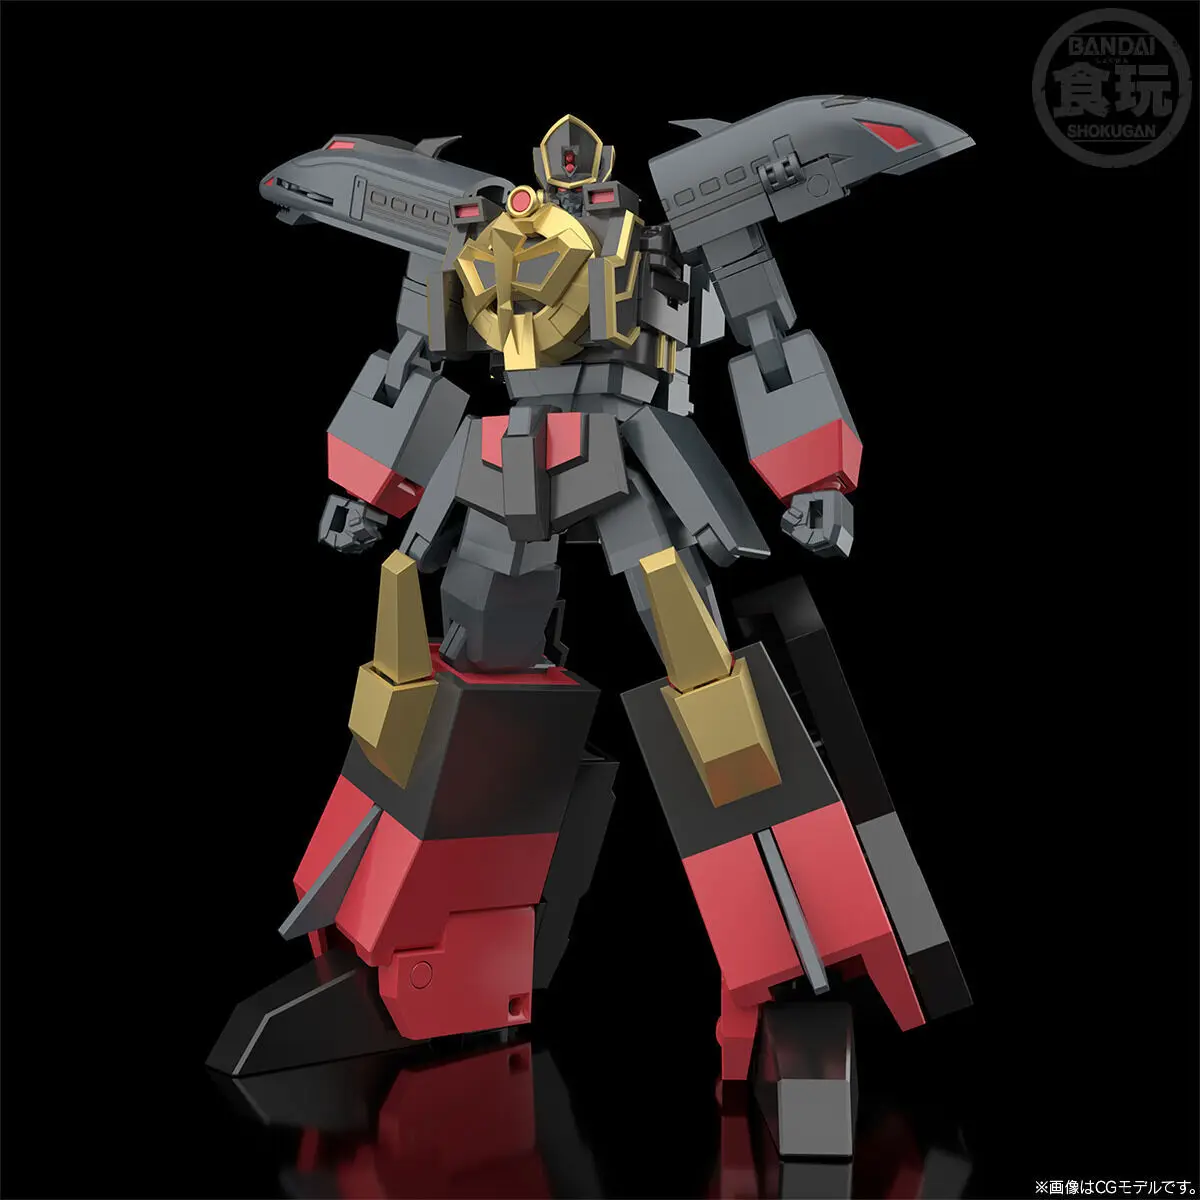 

BANDAI SHOKUGAN The Brave Express Might Gaine PVC Action Figures Anime Black Mightgaine Model Figurine Toys Doll Gift